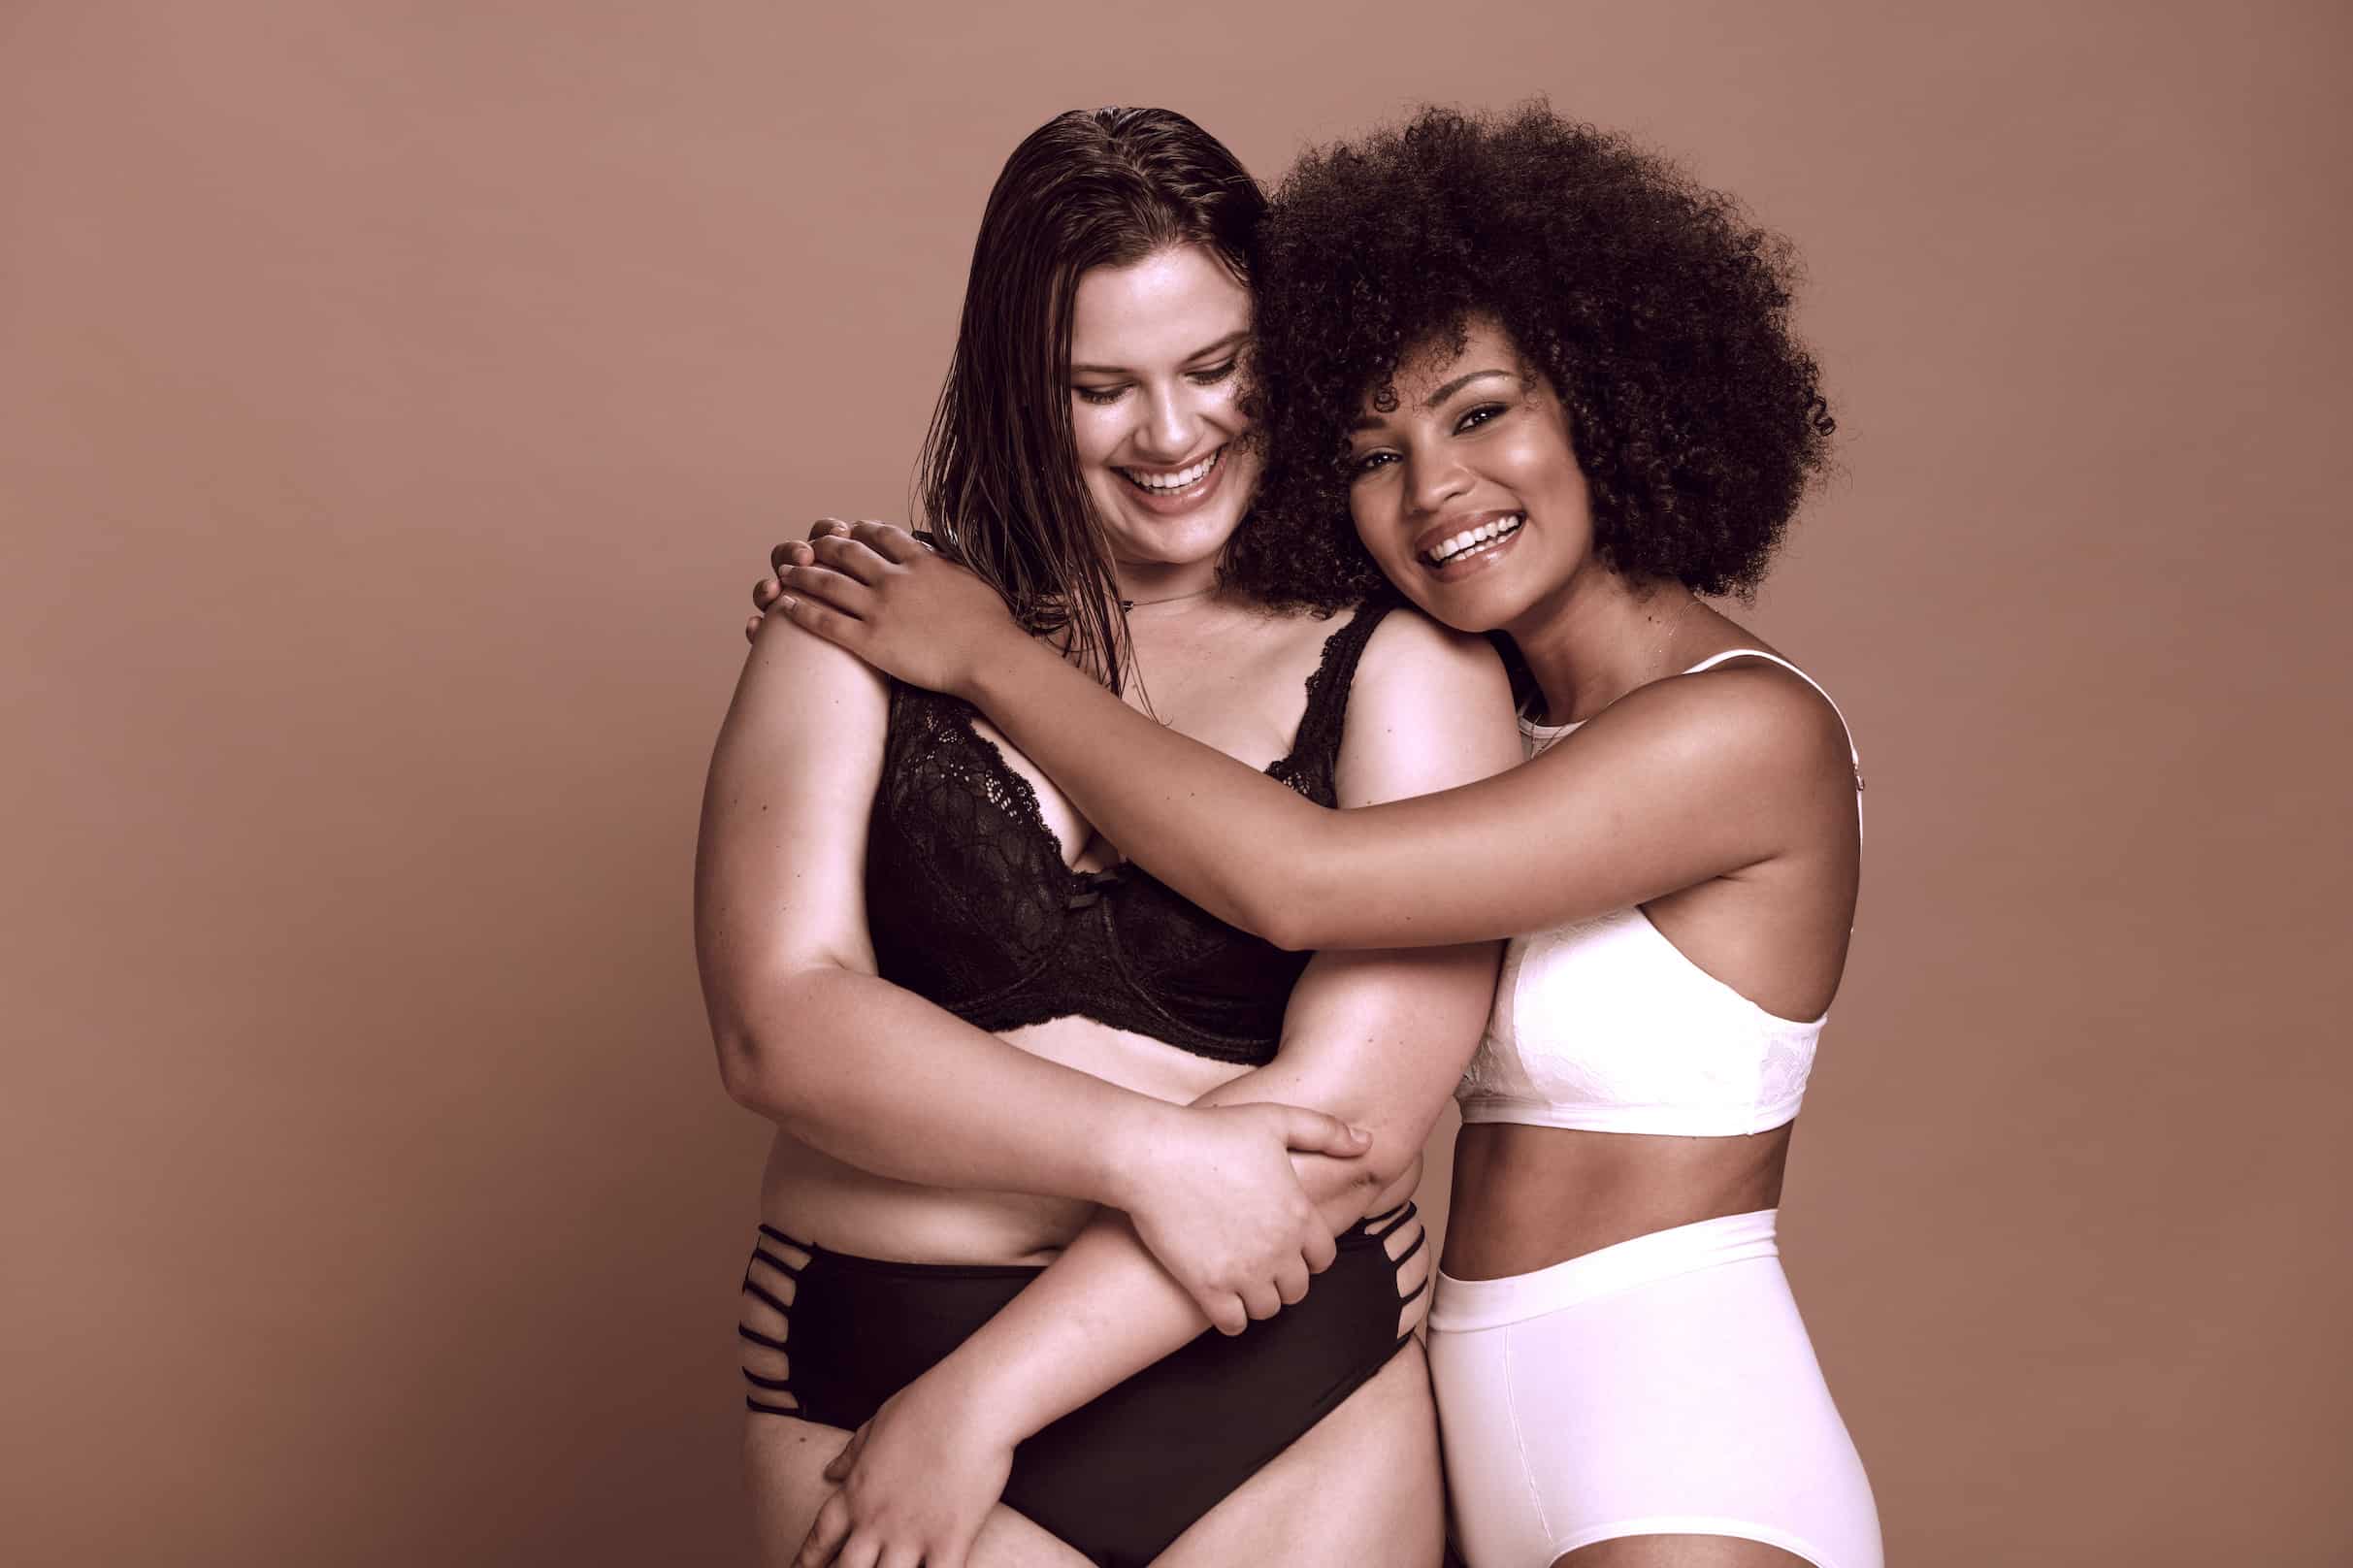 Multi-ethnic females in lingerie standing together